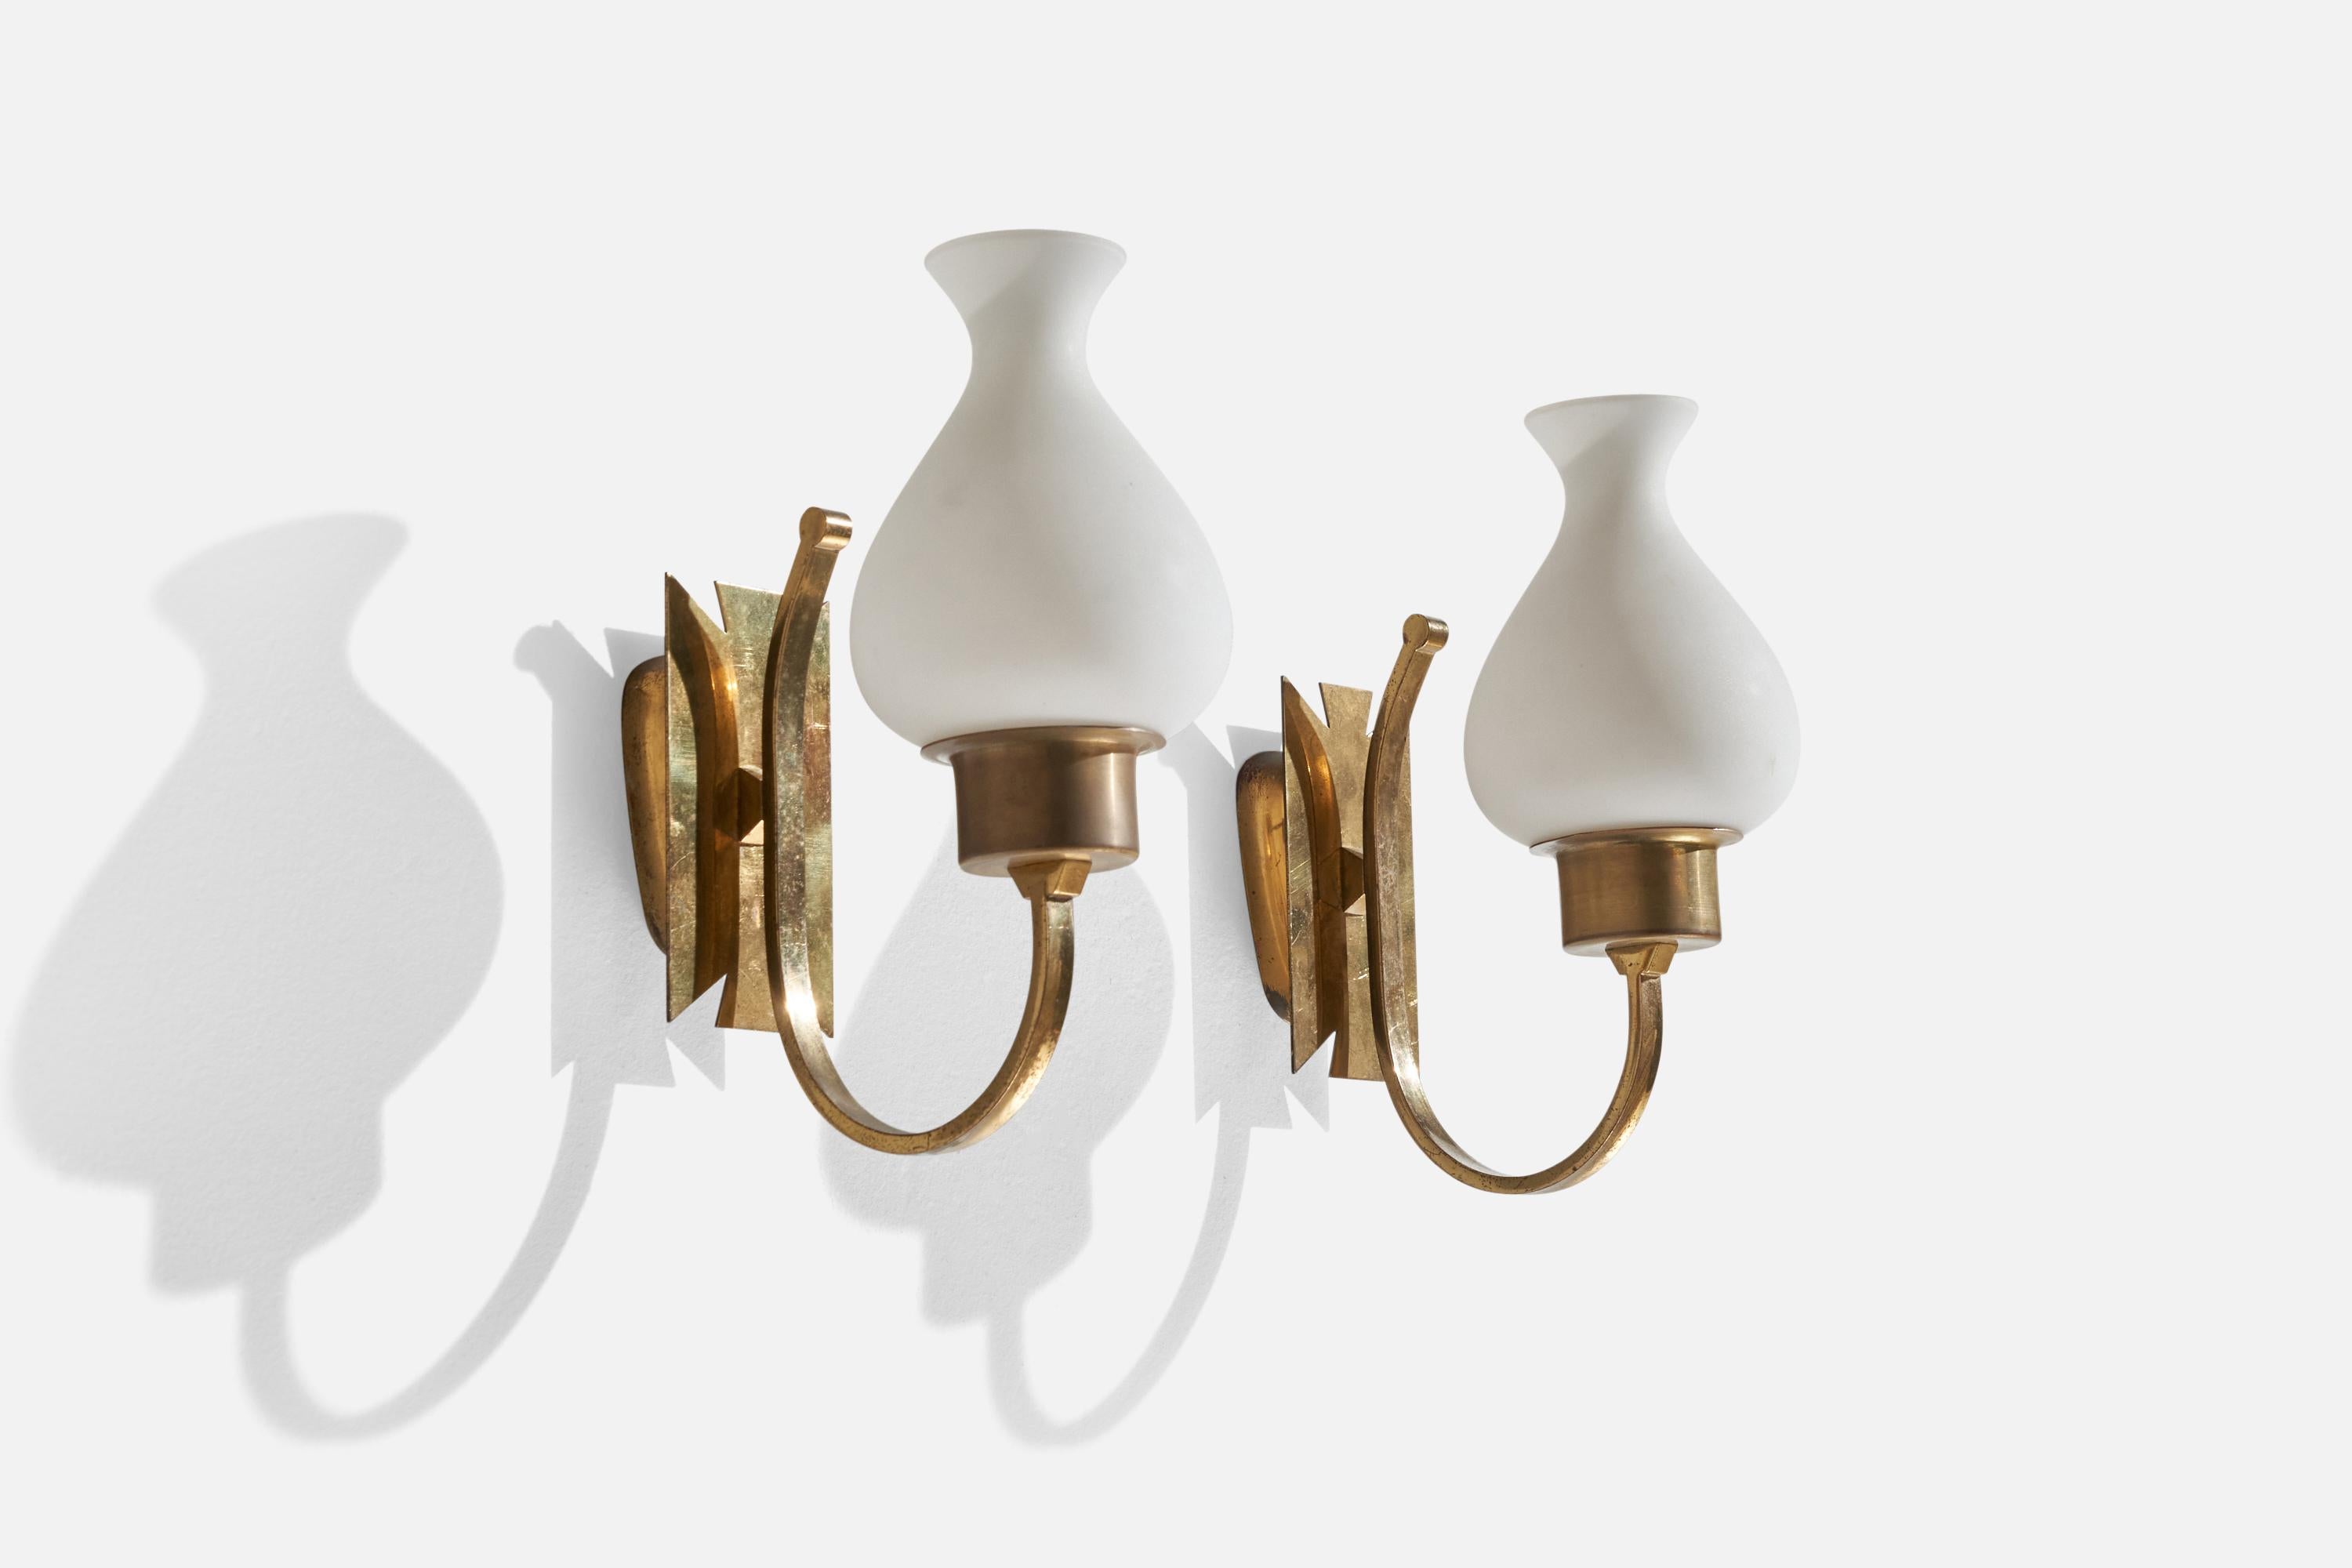 A pair of brass and opaline glass wall lights designed and procuced in Italy, 1940s.

Overall Dimensions (inches): 9.75” H x 4.25” W x 7.25” D
Back Plate Dimensions (inches): 3.5” H x 2.5” W x 0.75”
Bulb Specifications: E-14 Bulbs
Number of Sockets: